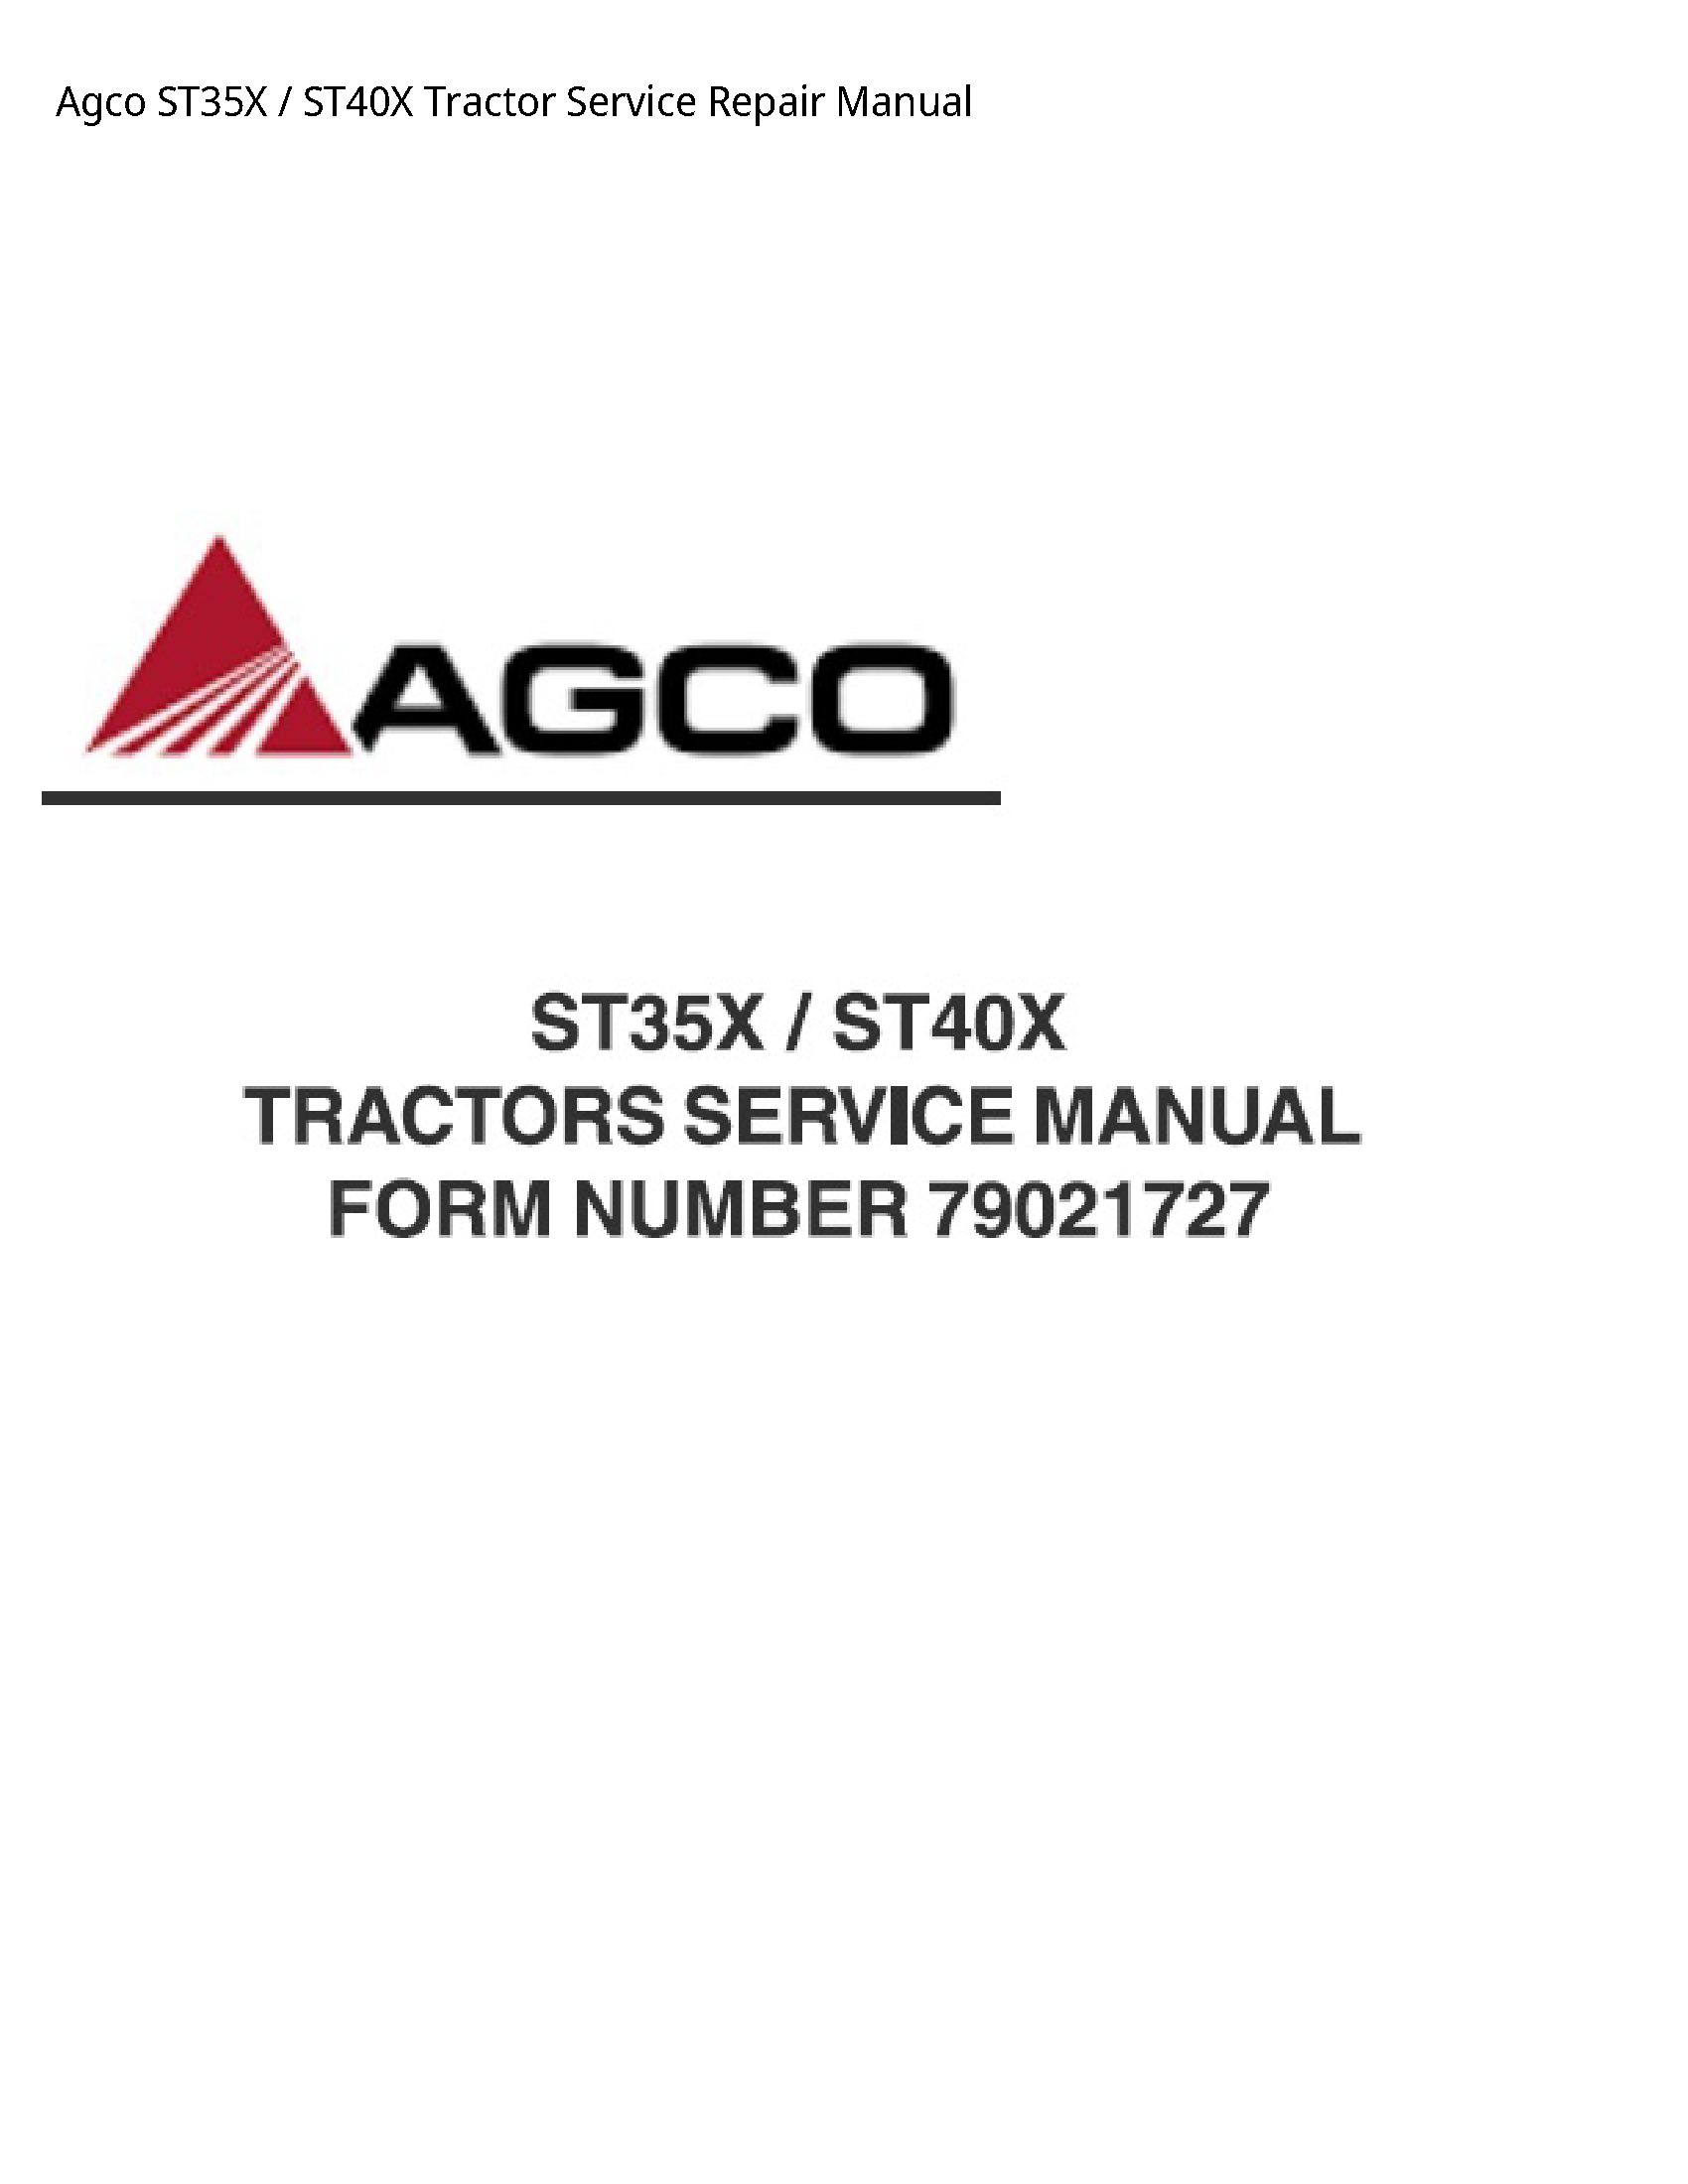 AGCO ST35X Tractor manual